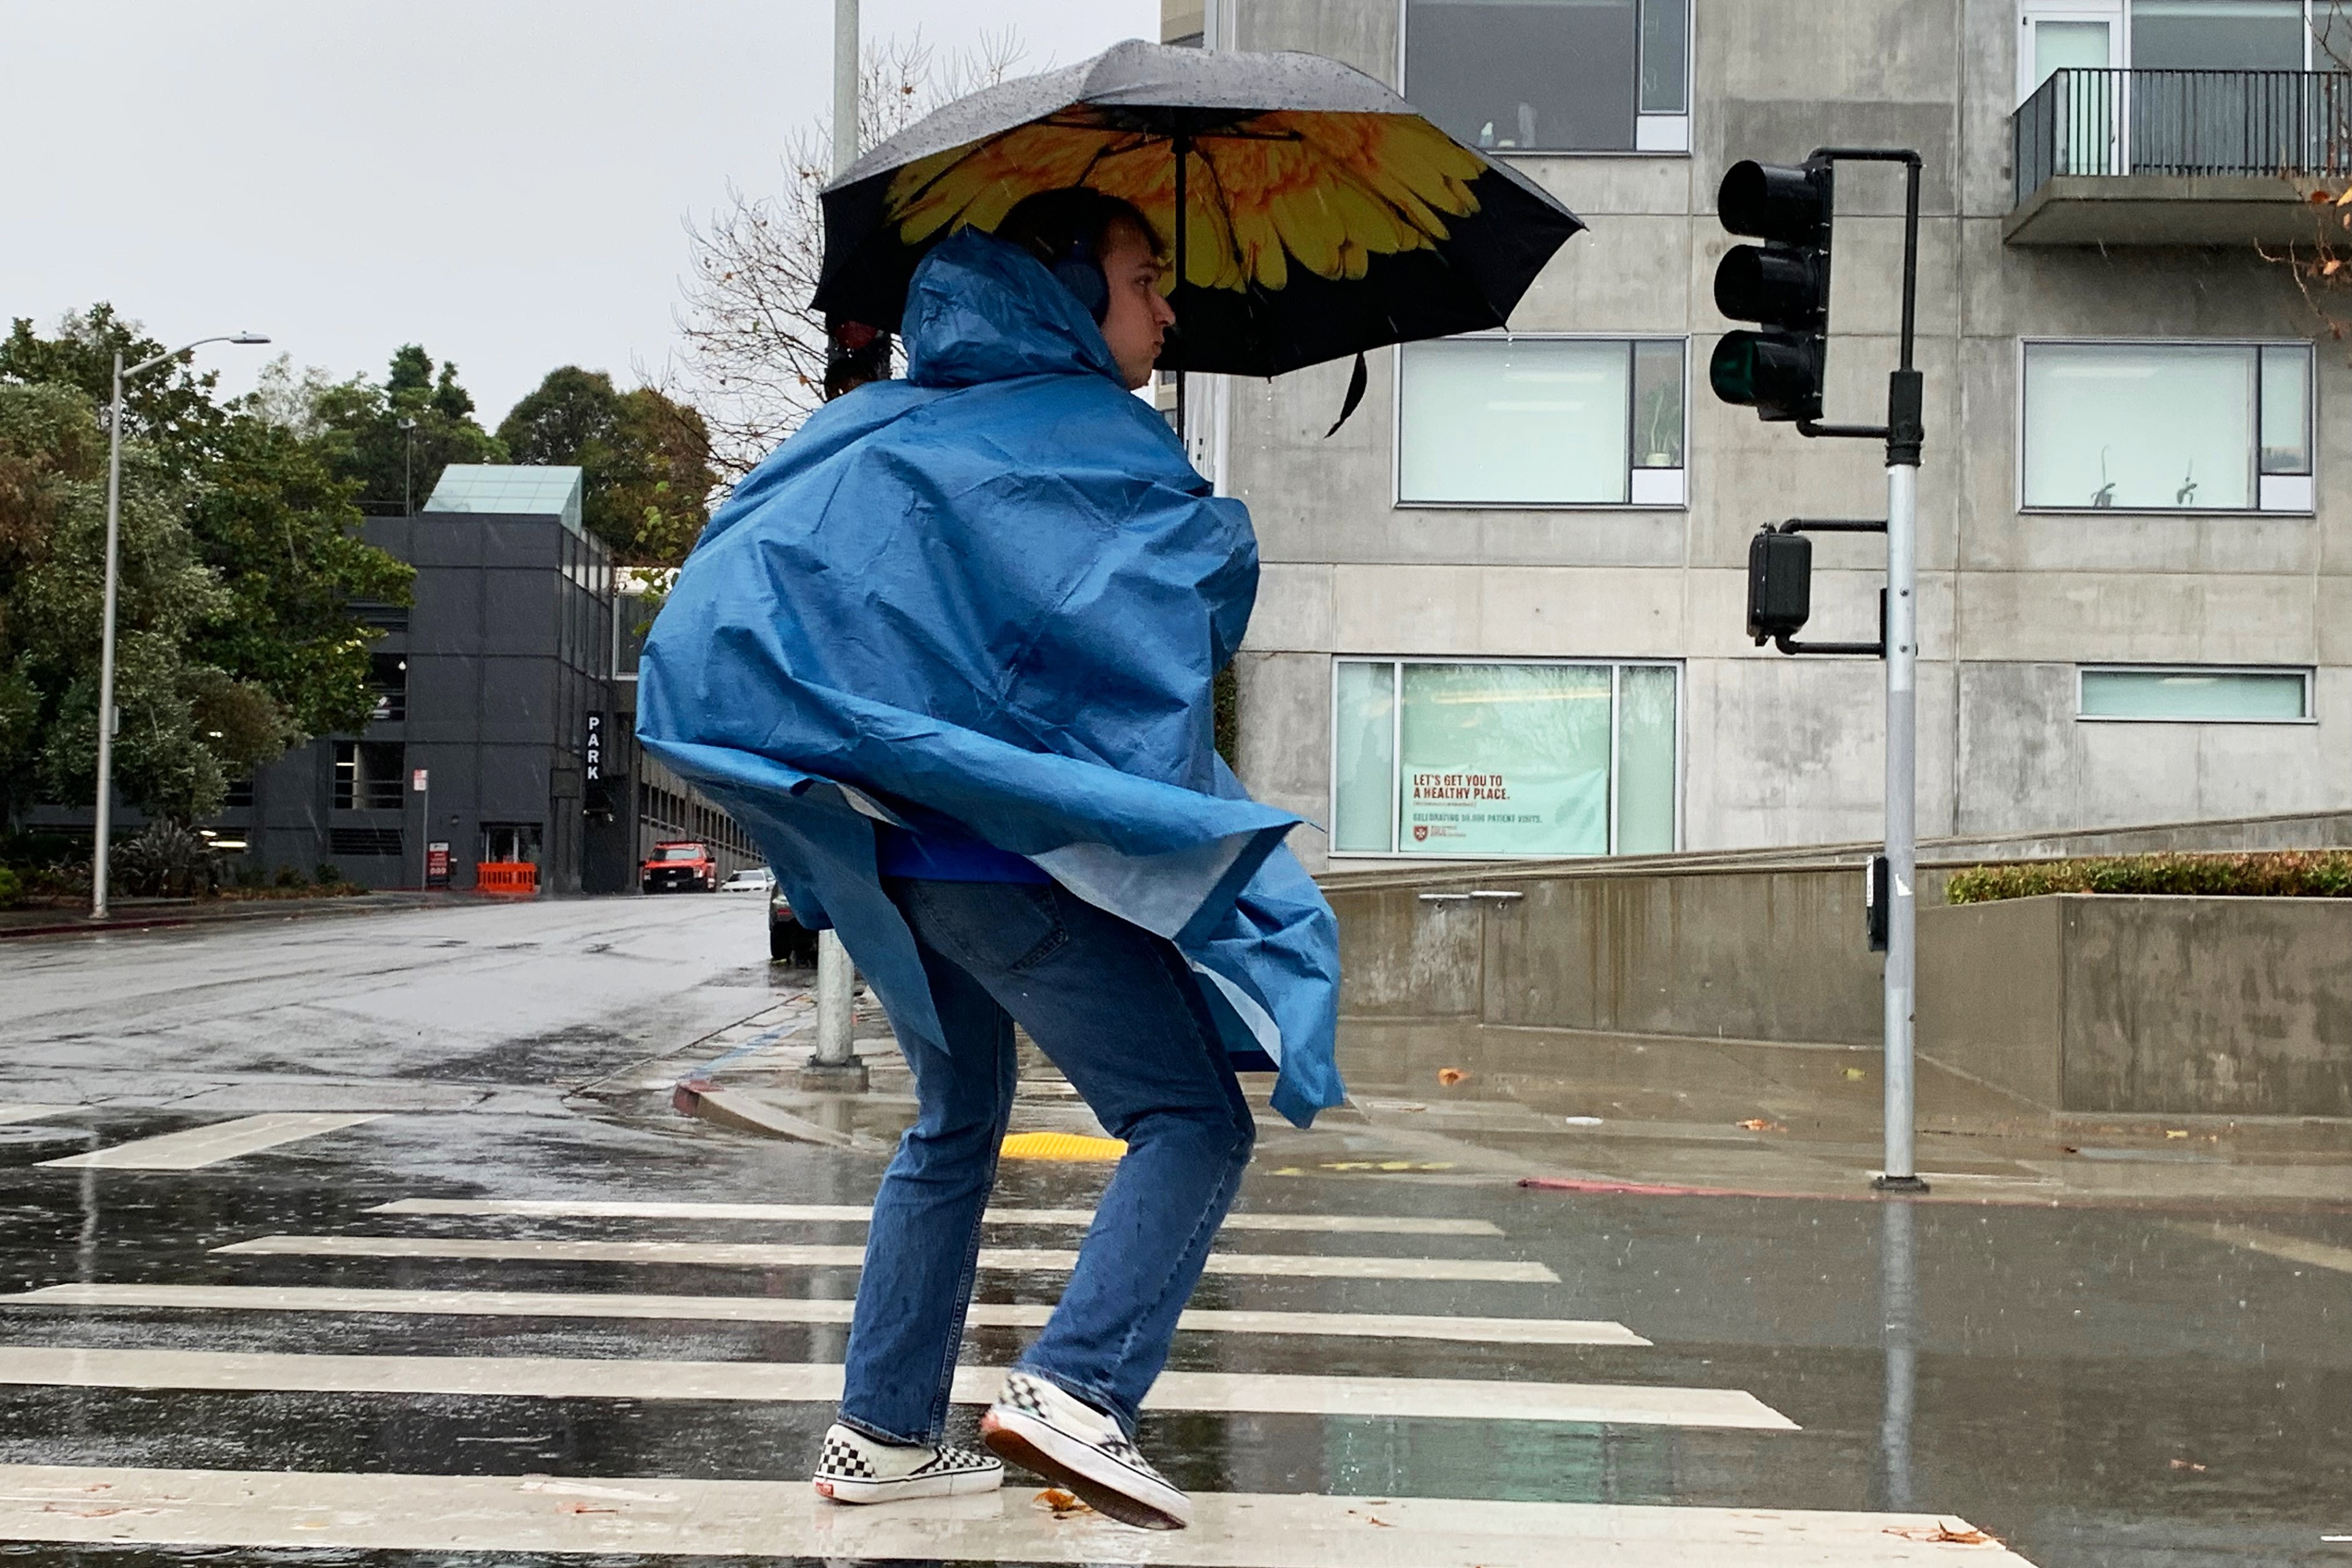 A person holding an umbrella waits for oncoming cars to pass before walking through a crosswalk.